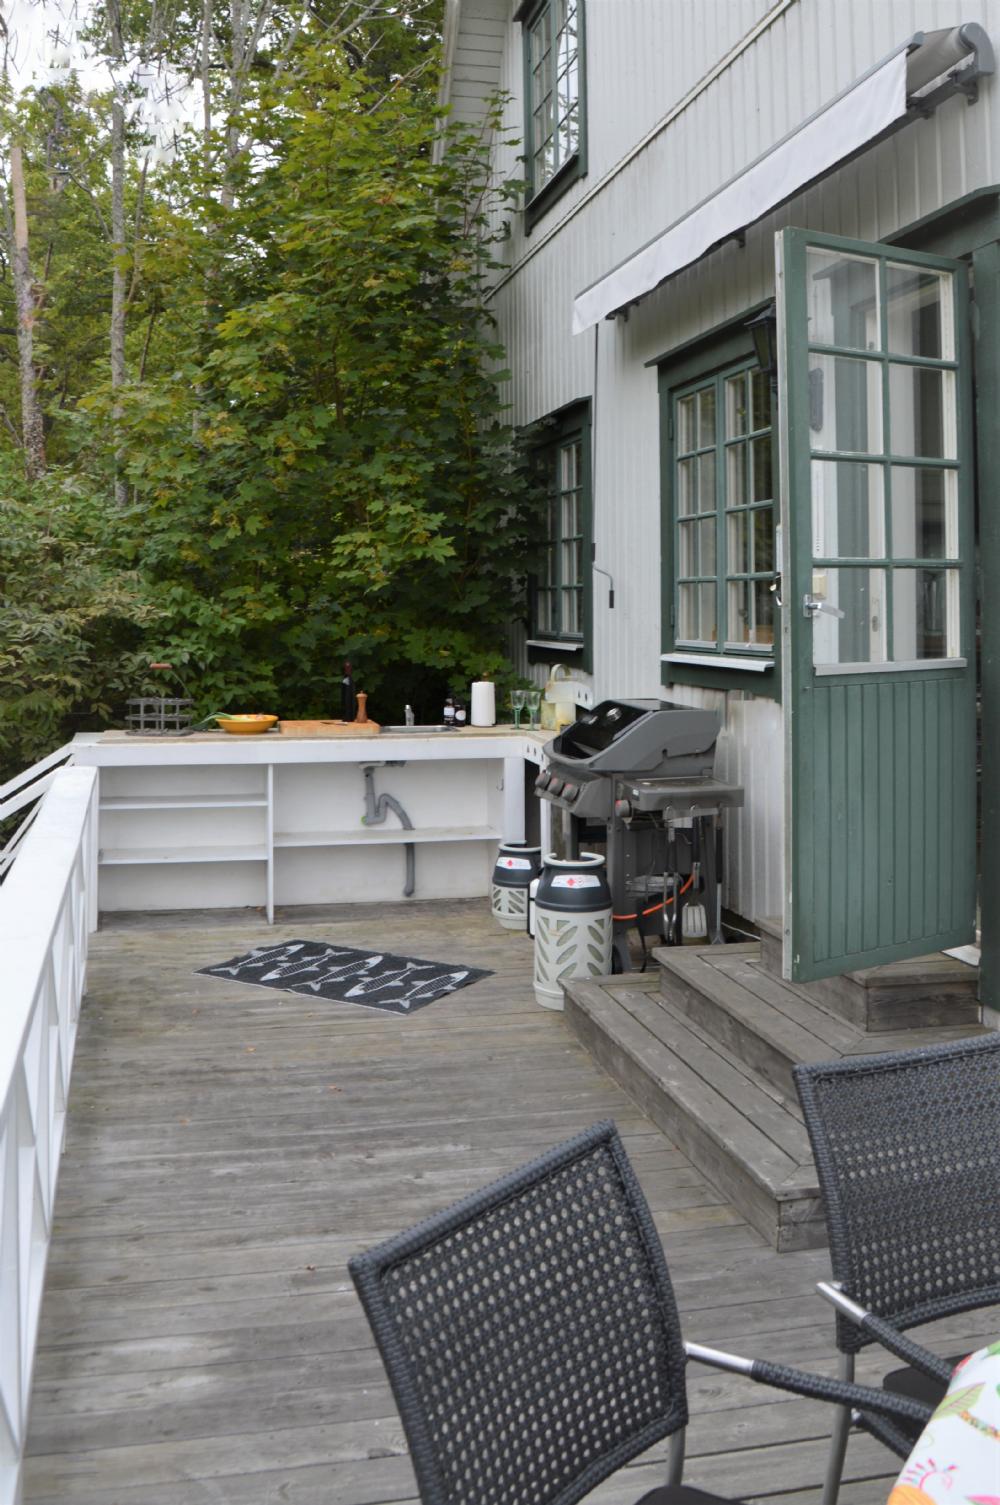 Kksaltan med grill och kksbnk/ Kitchen terrace with bbq and facilities for outdoor cooking 